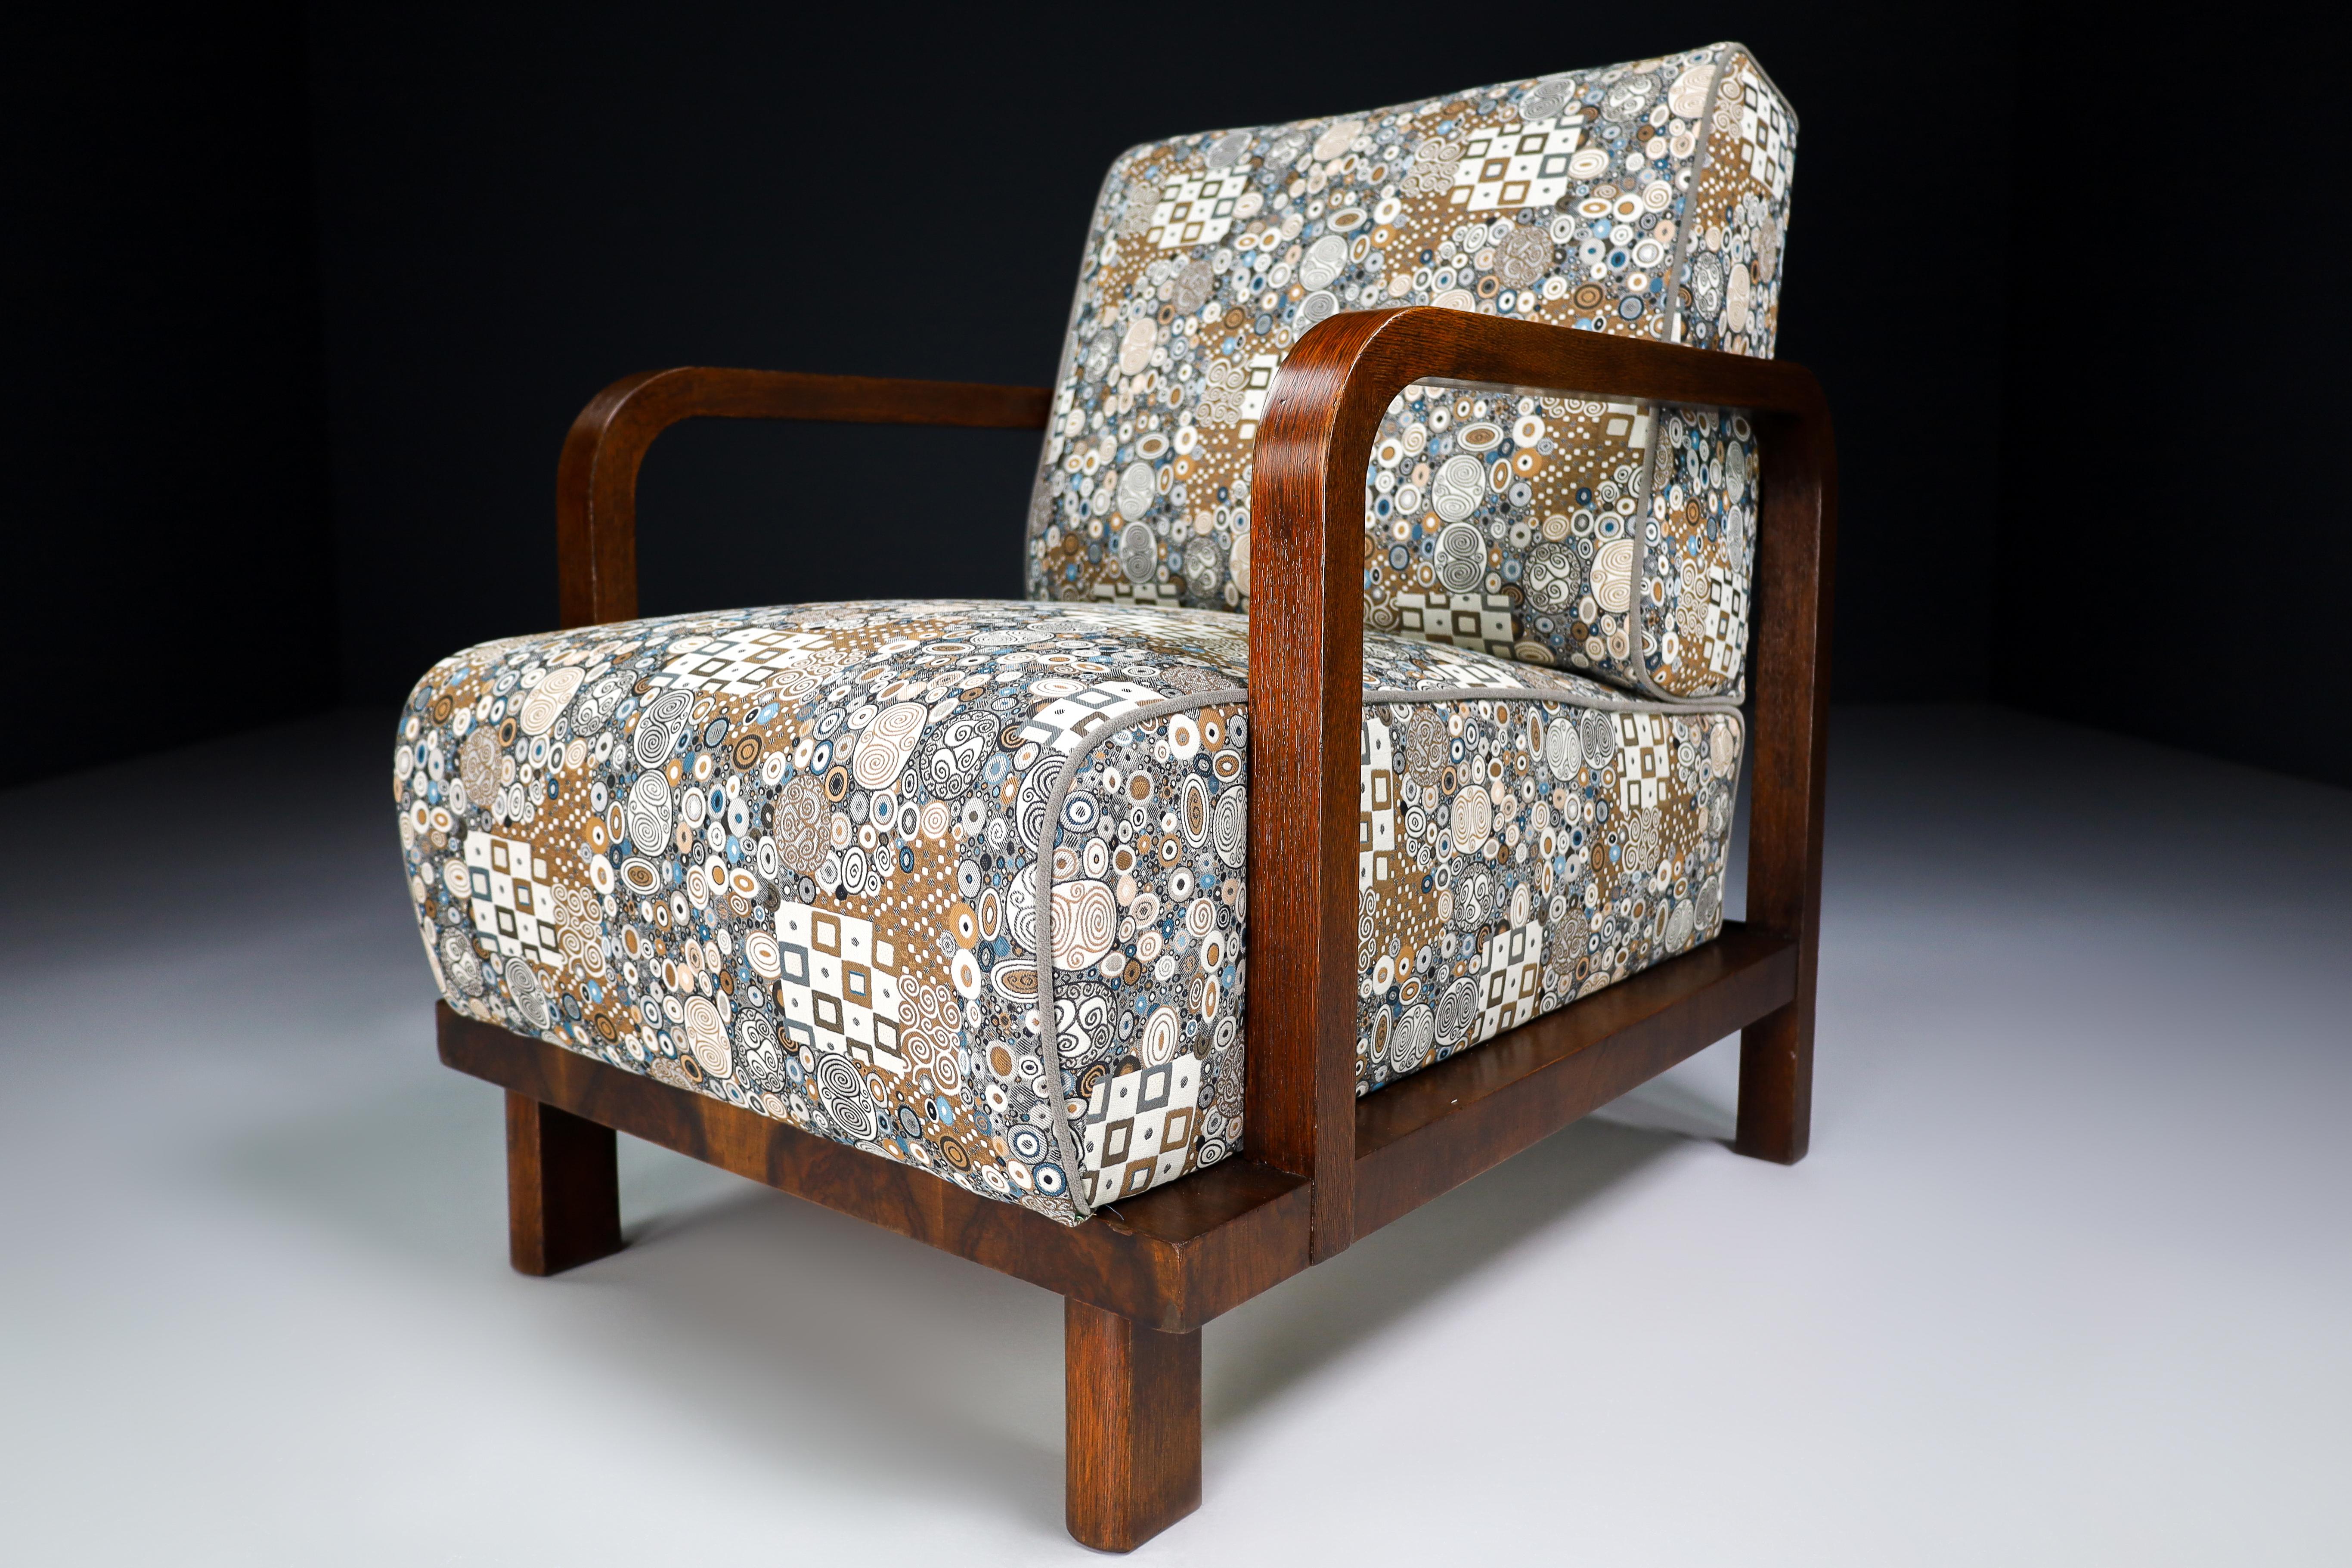 20th Century Art-Deco Oak Armchairs in Reupholstered in Fabric, Praque, 1930s